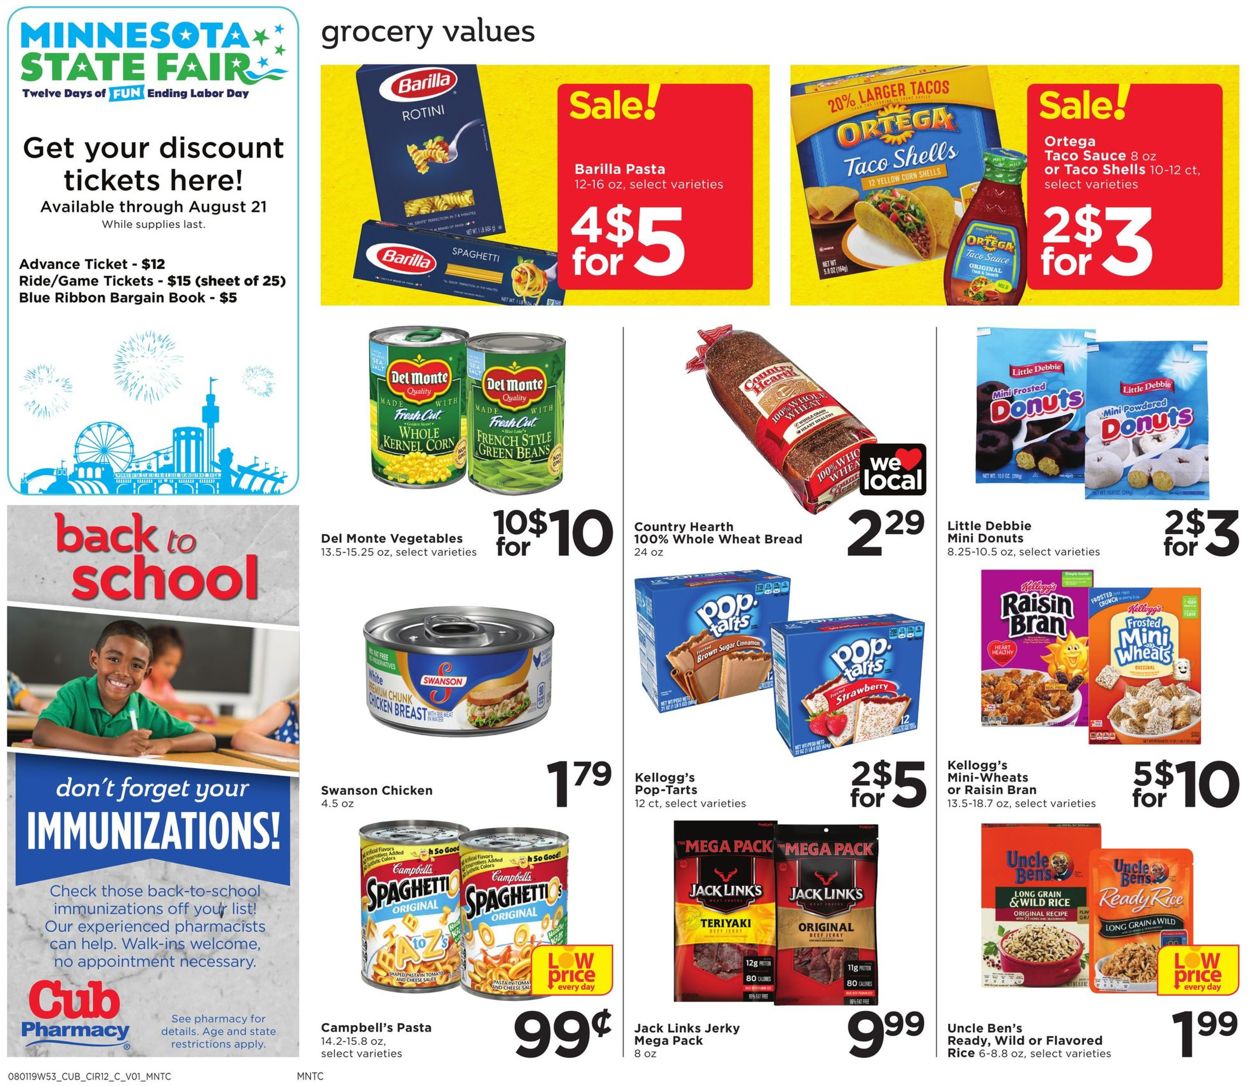 Cub Foods Current weekly ad 08/01 - 08/07/2019 [12] - 0